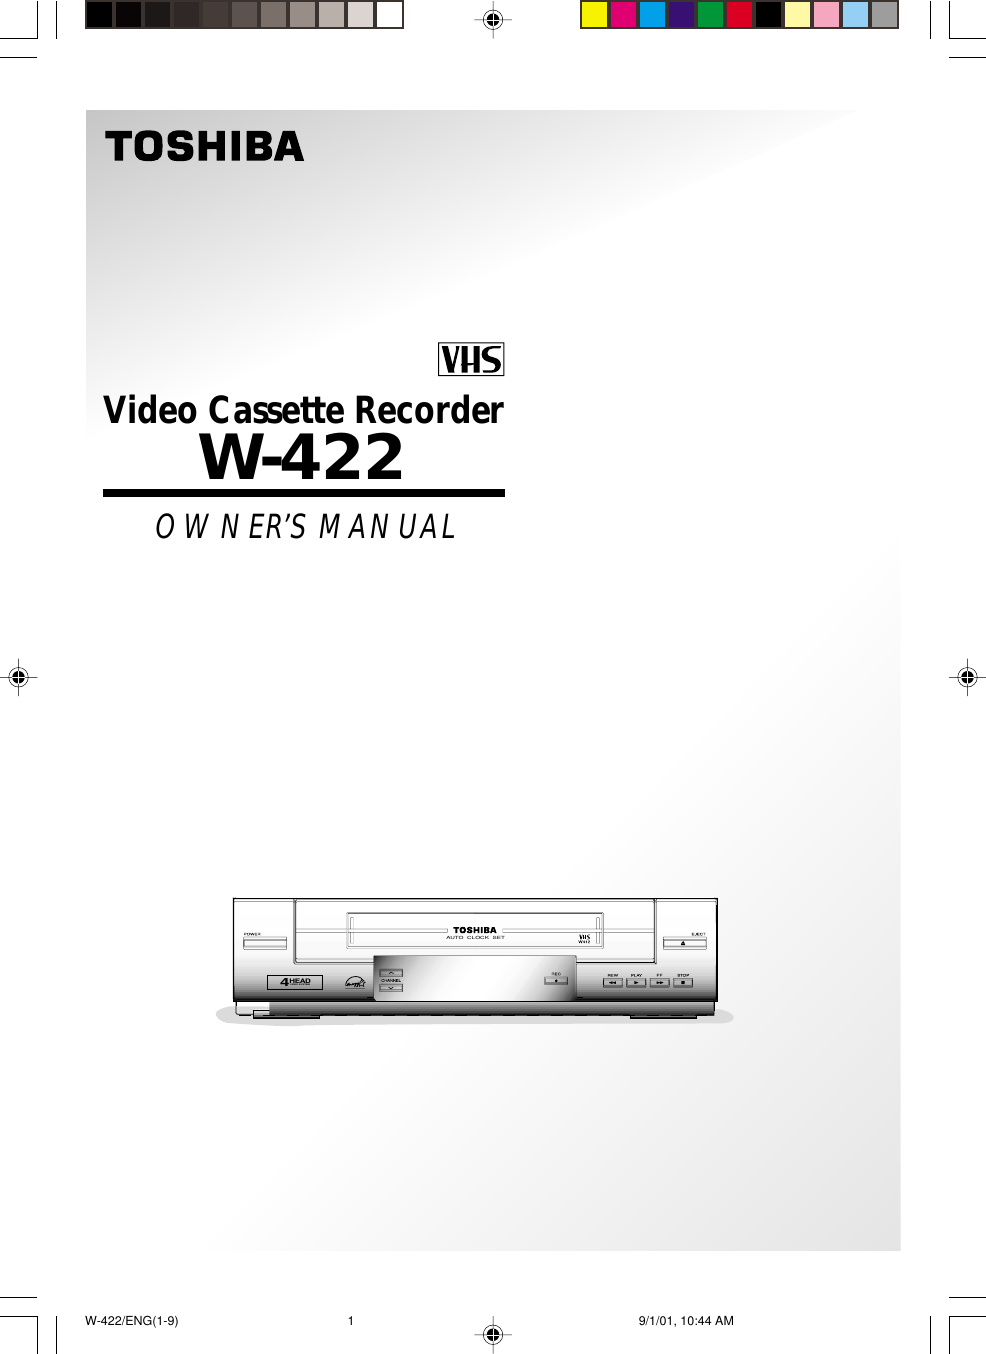 Video Cassette RecorderW-422OWNER’S MANUALHEADVIDEO SYSTEM4AUTO  CLOCK  SETW-422/ENG(1-9) 9/1/01, 10:44 AM1